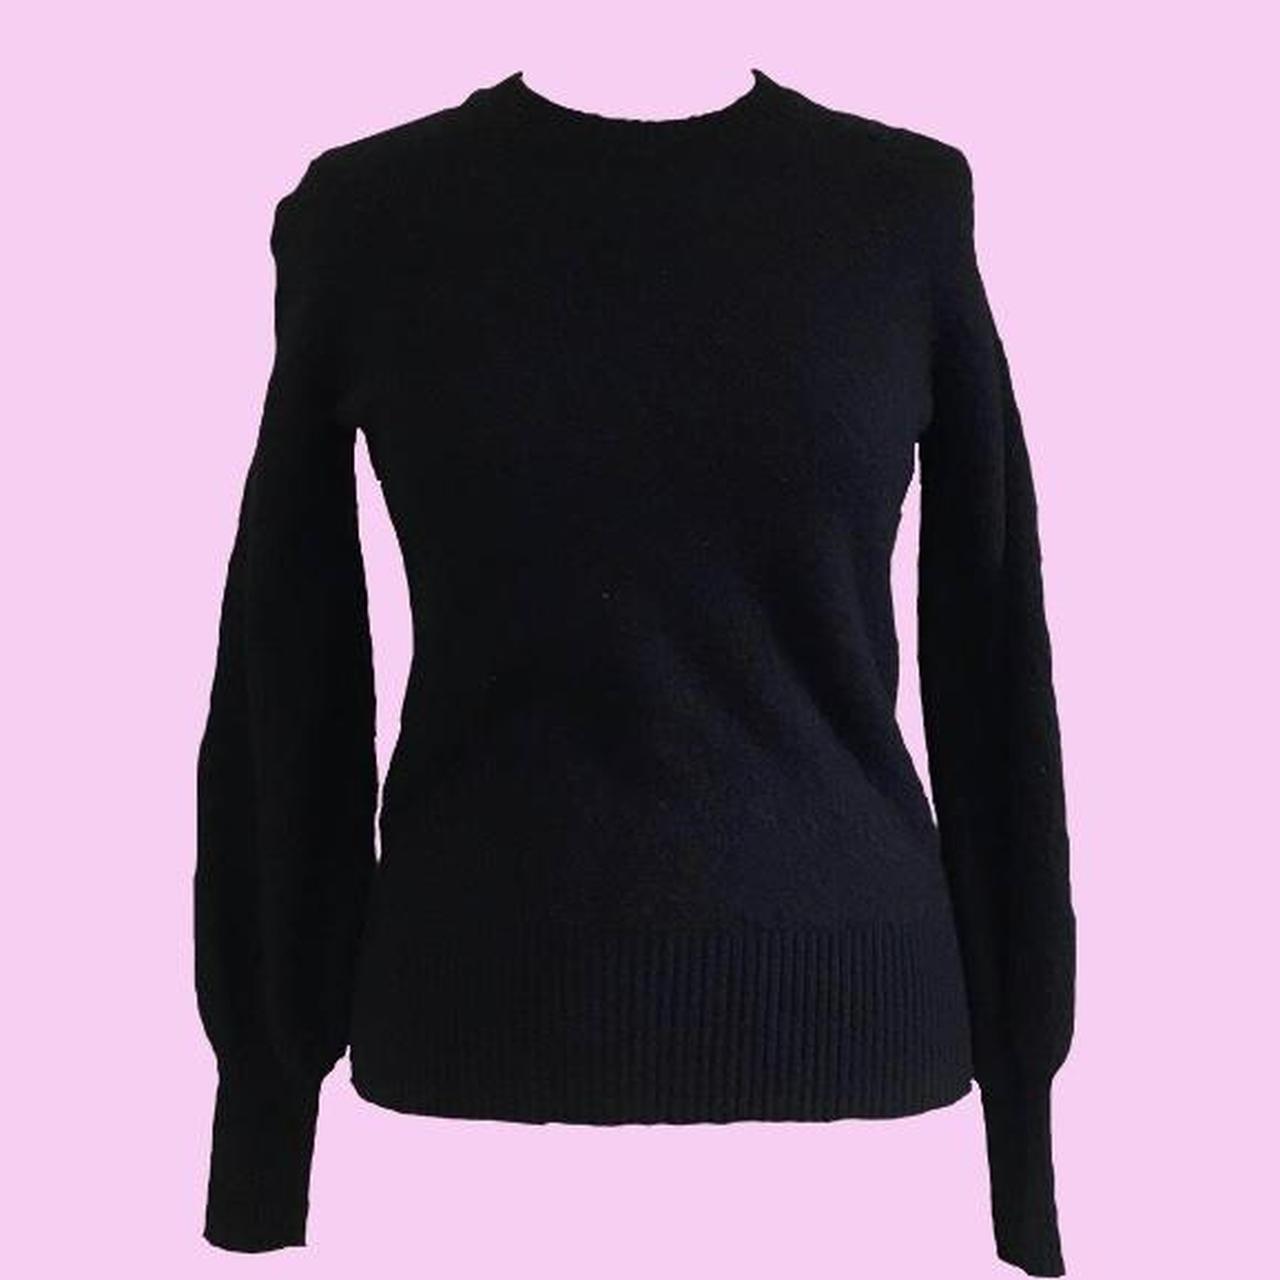 Product Image 1 - THE LIMITED CASHMERE SWEATER. Size